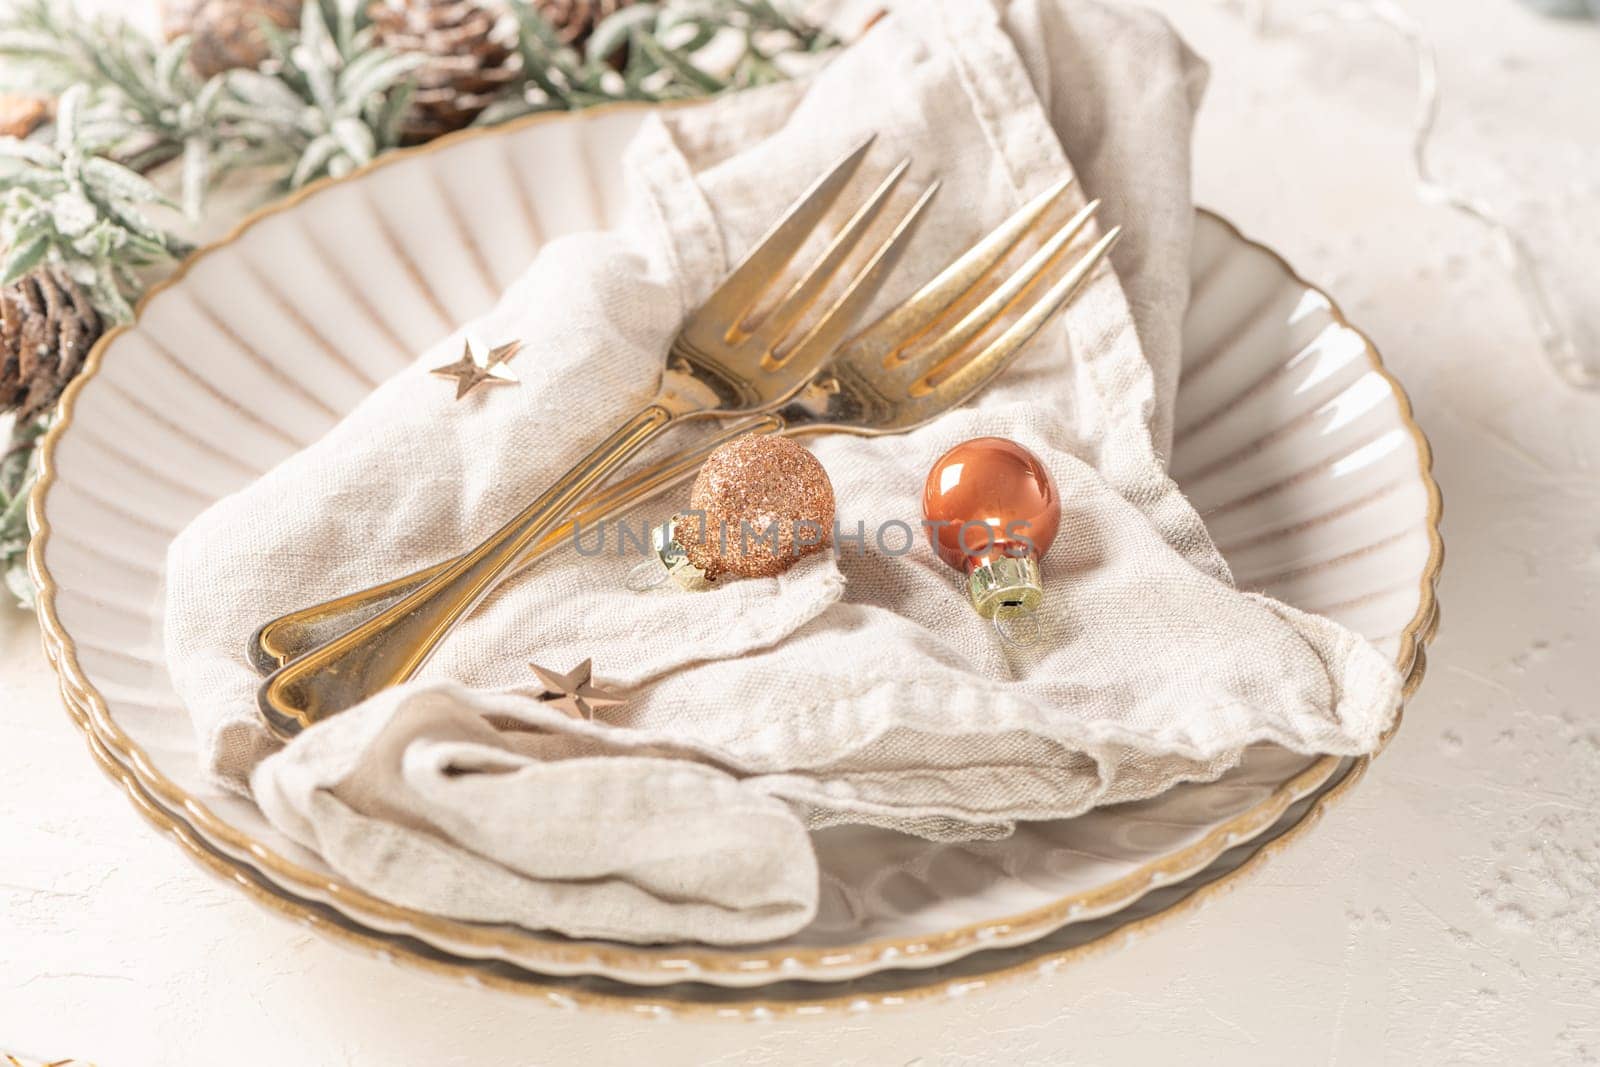 Christmas table with white plates, golden cutlery and holiday decorations.